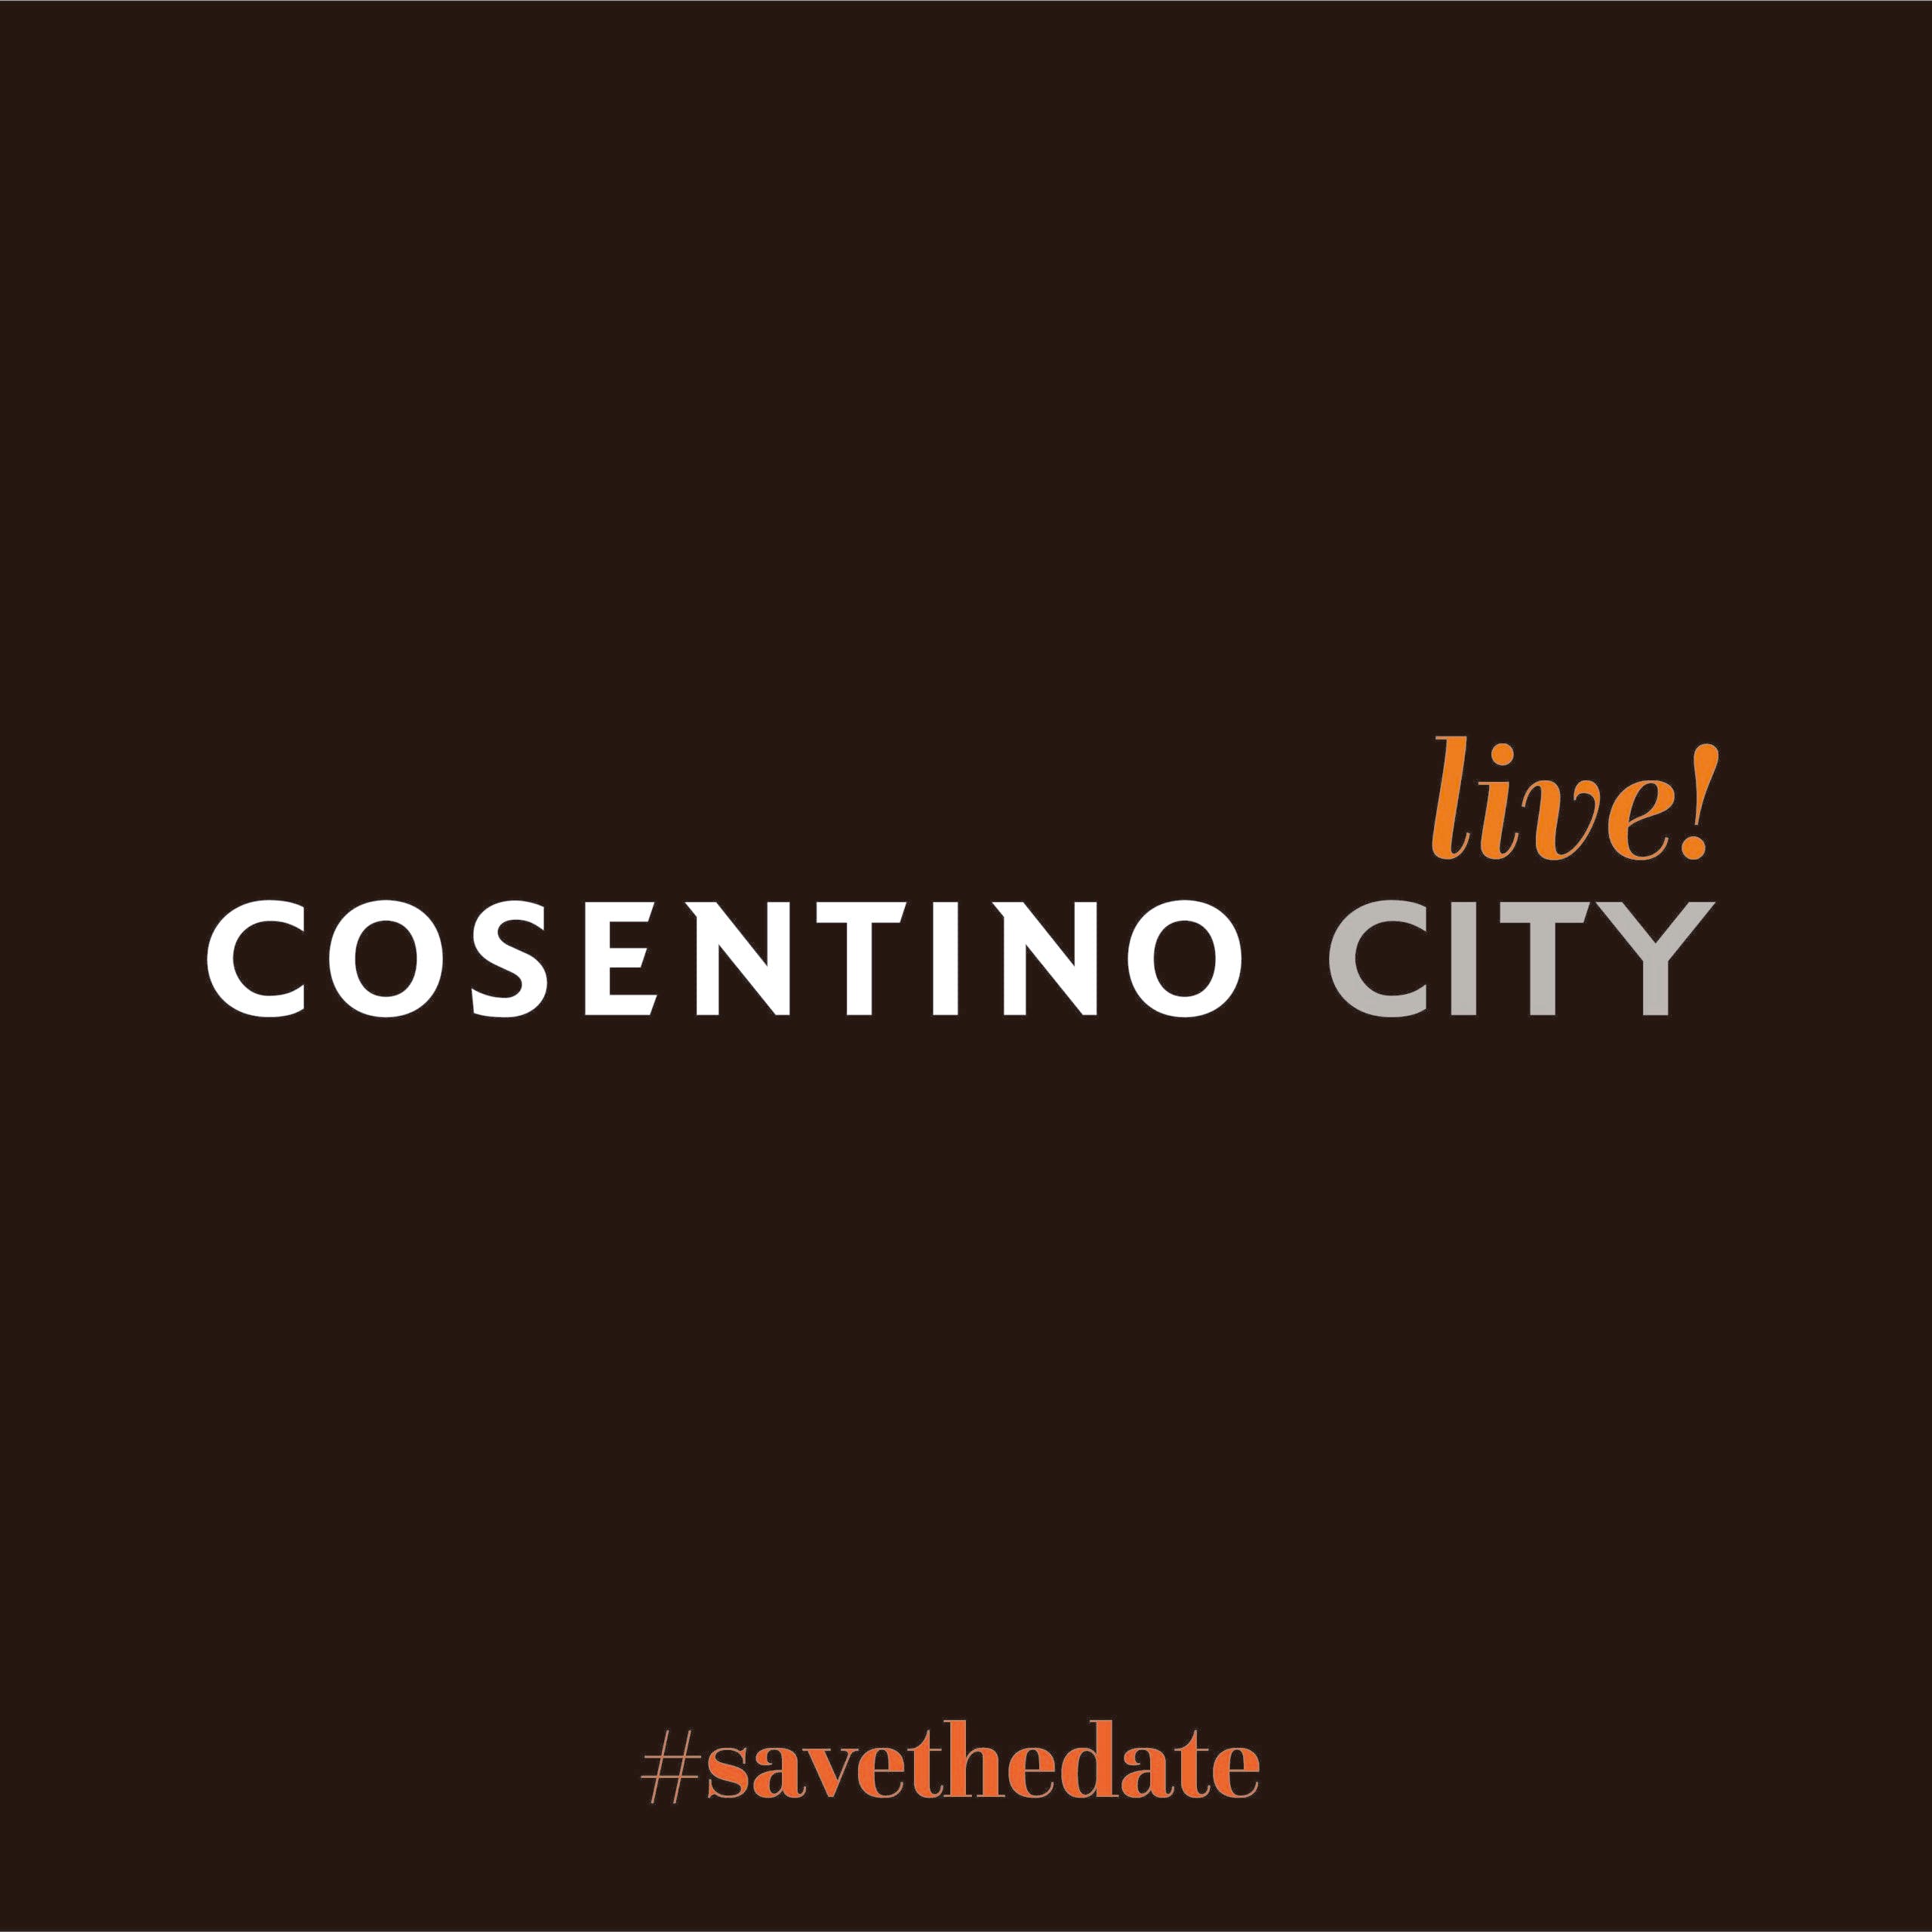 Image 15 of Cosentino City Live lr scaled 1 in "Cosentino City Live!" the best design from home - Cosentino